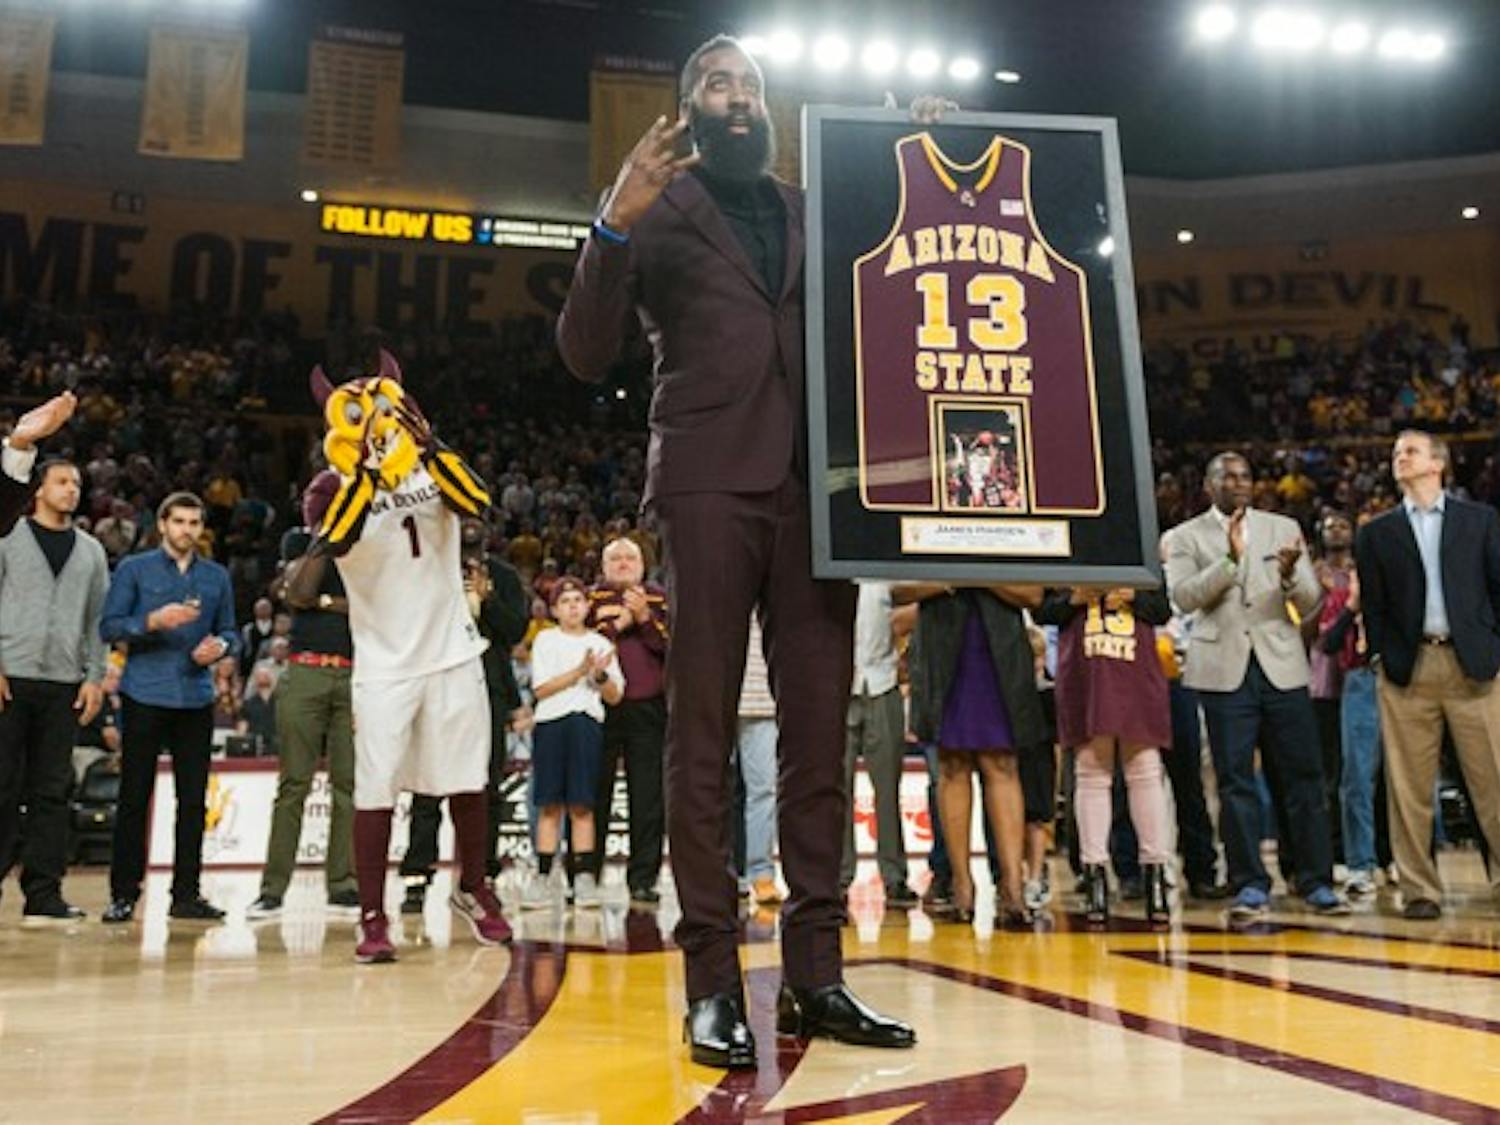 Houston Rockets shooting guard James Harden displays an award on Wednesday, Feb. 18, 2015, at Wells Fargo Arena in Tempe. Harden, a former ASU basketball standout, was honored at halftime for his achievements both with the Sun Devils and in the NBA. (Ben Moffat/The State Press)